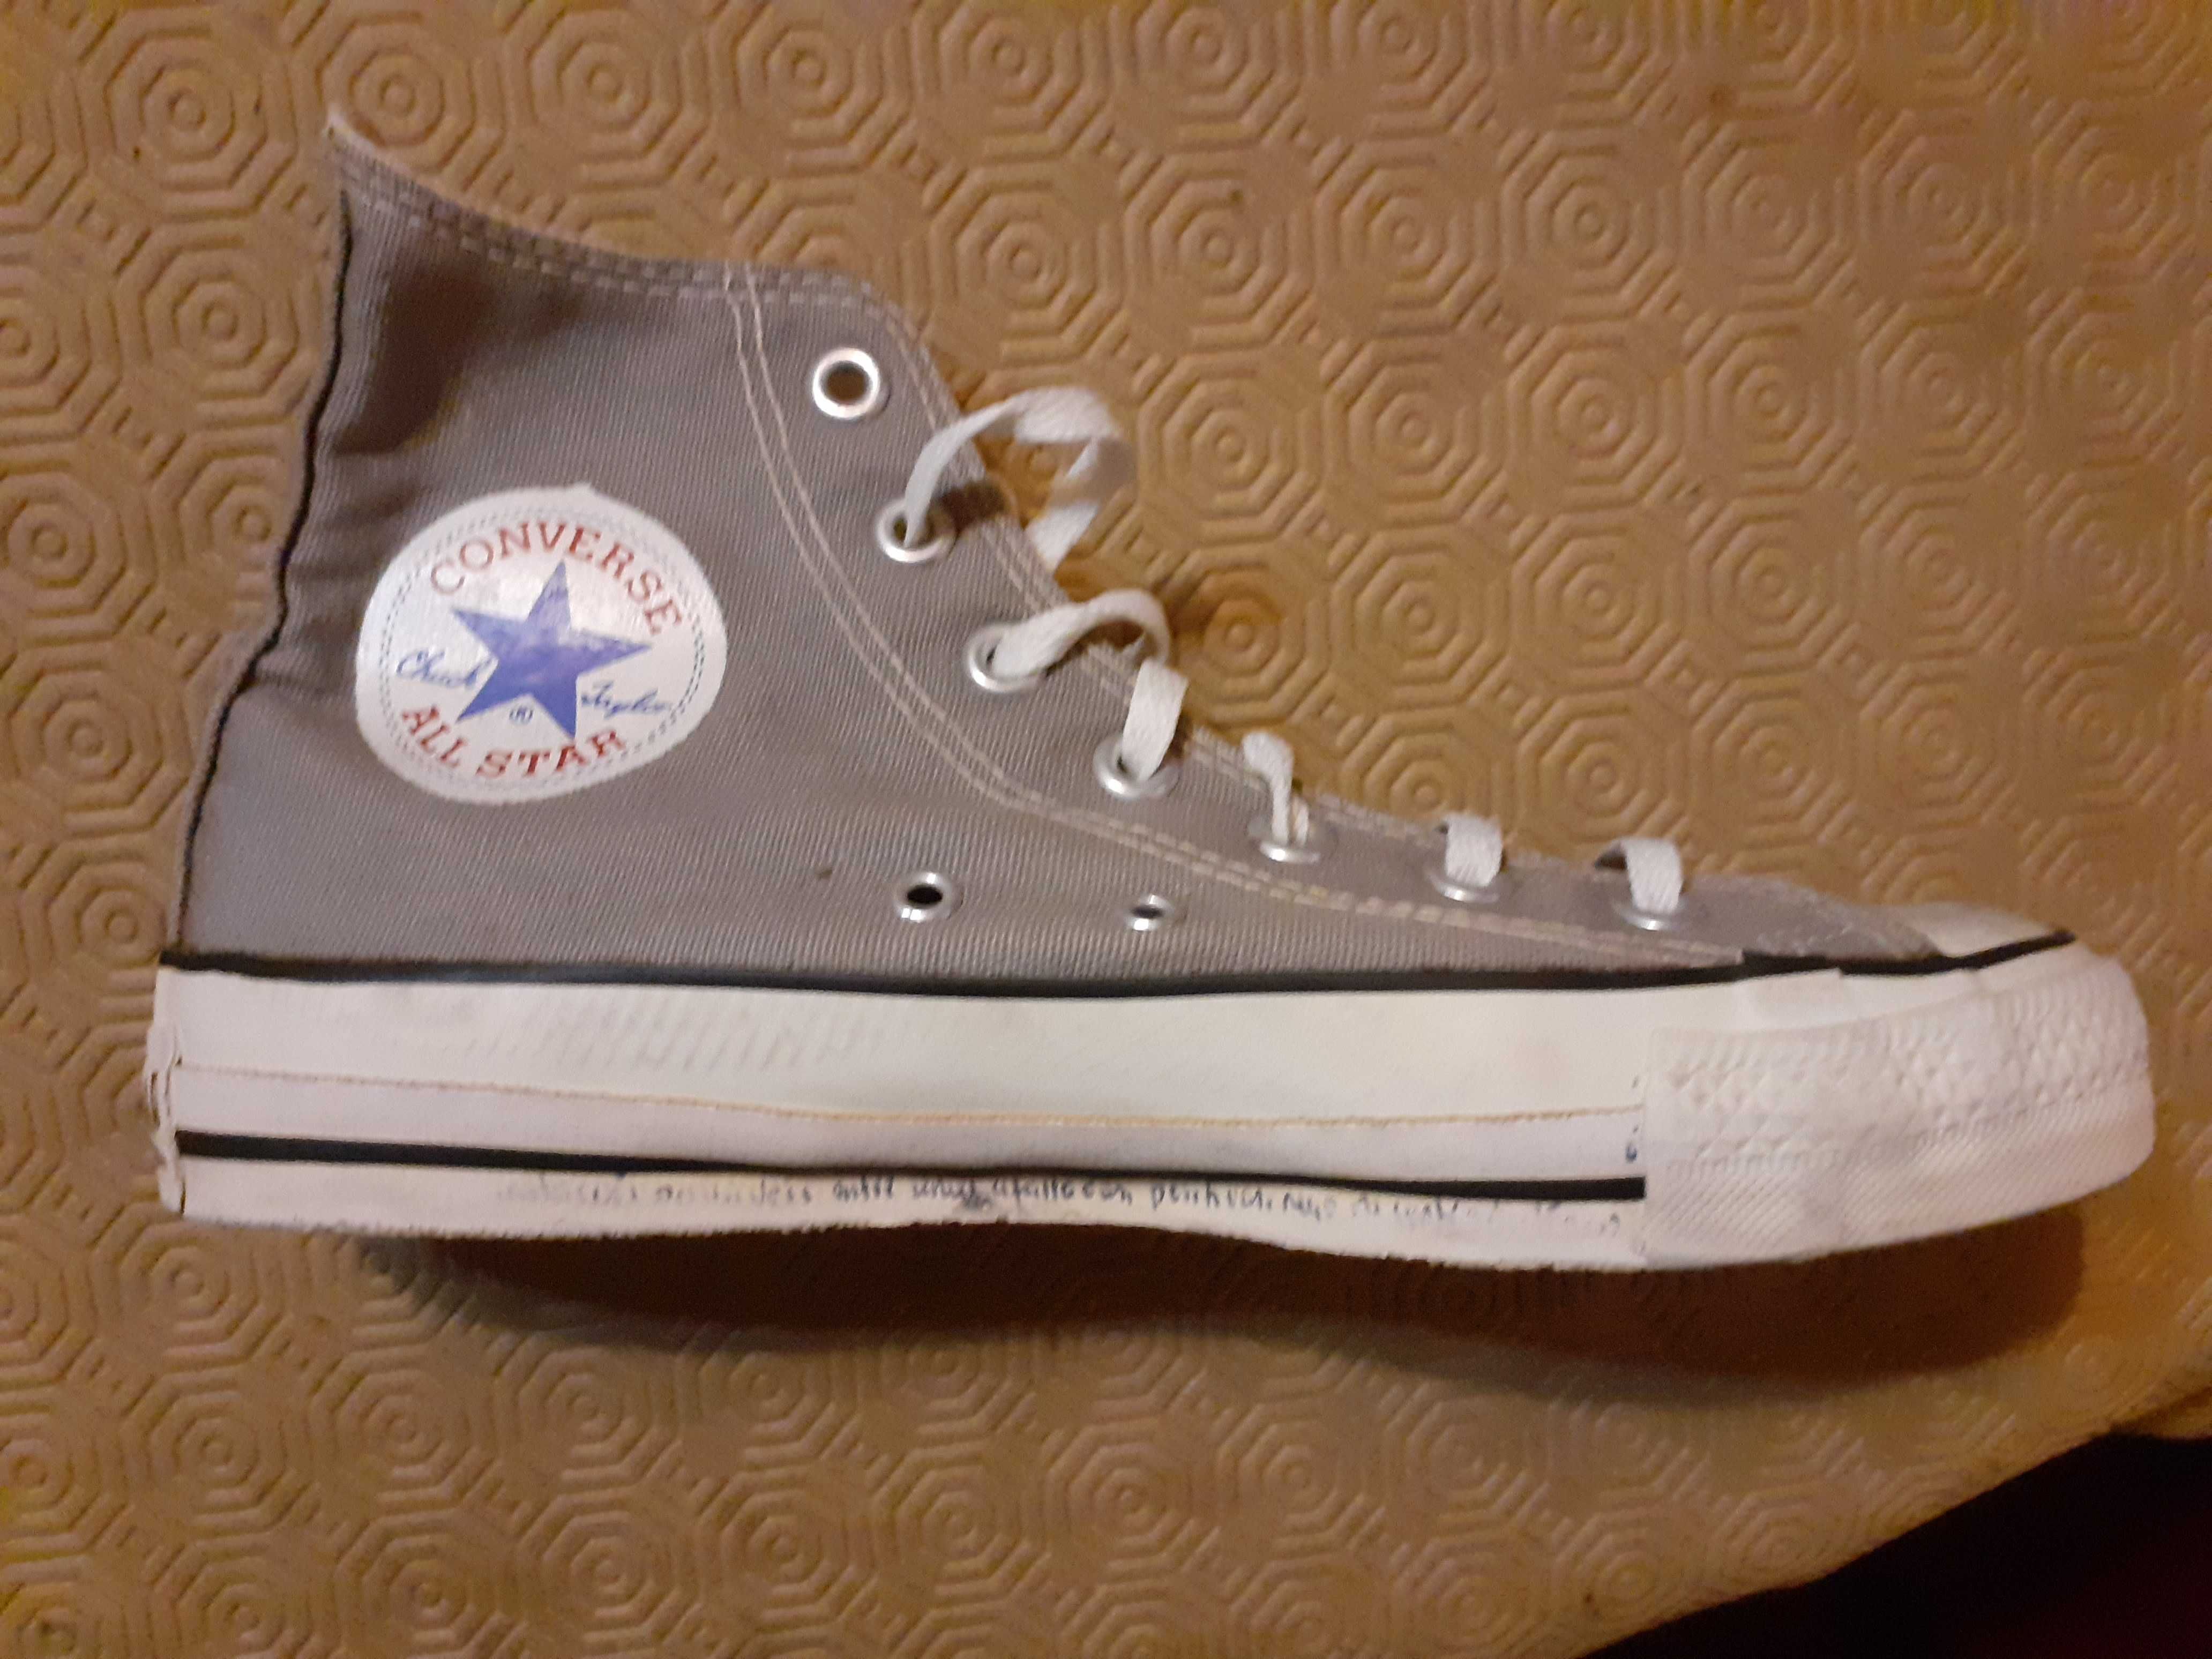 Tenis Bota Converse All Star Chuck Taylor made in U.S.A